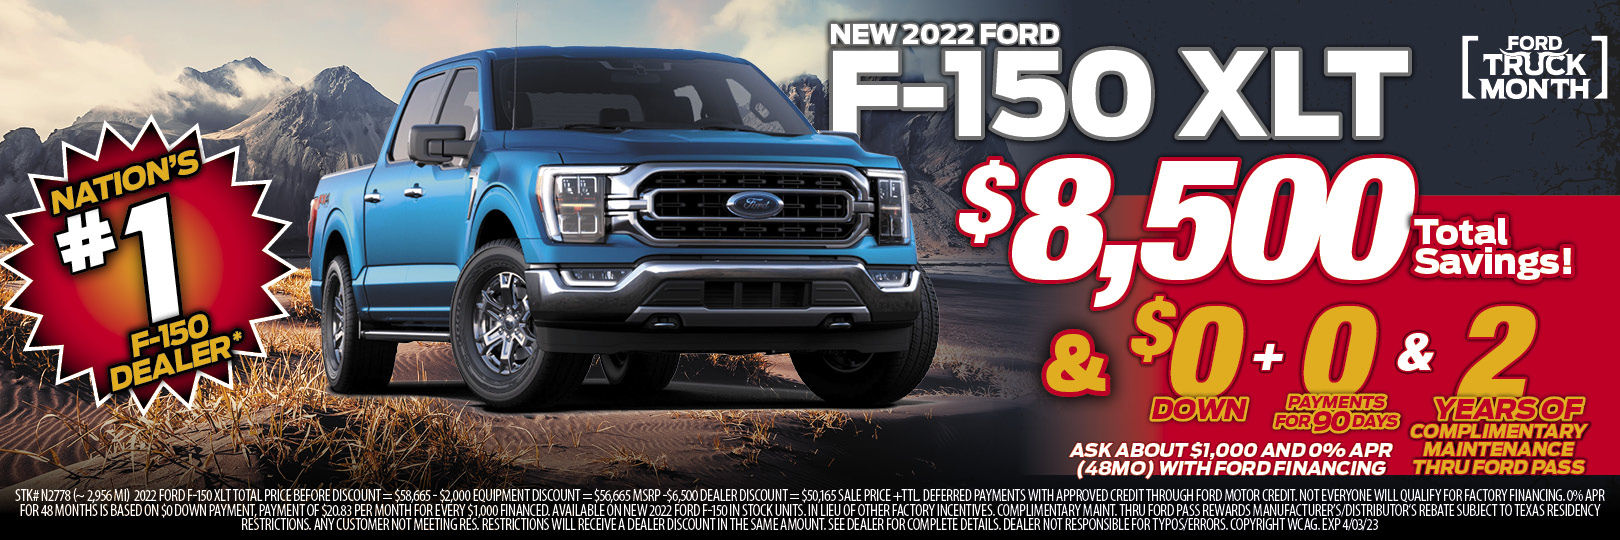 New Ford F-150 Truck Month Deal Houston Spring The Woodlands